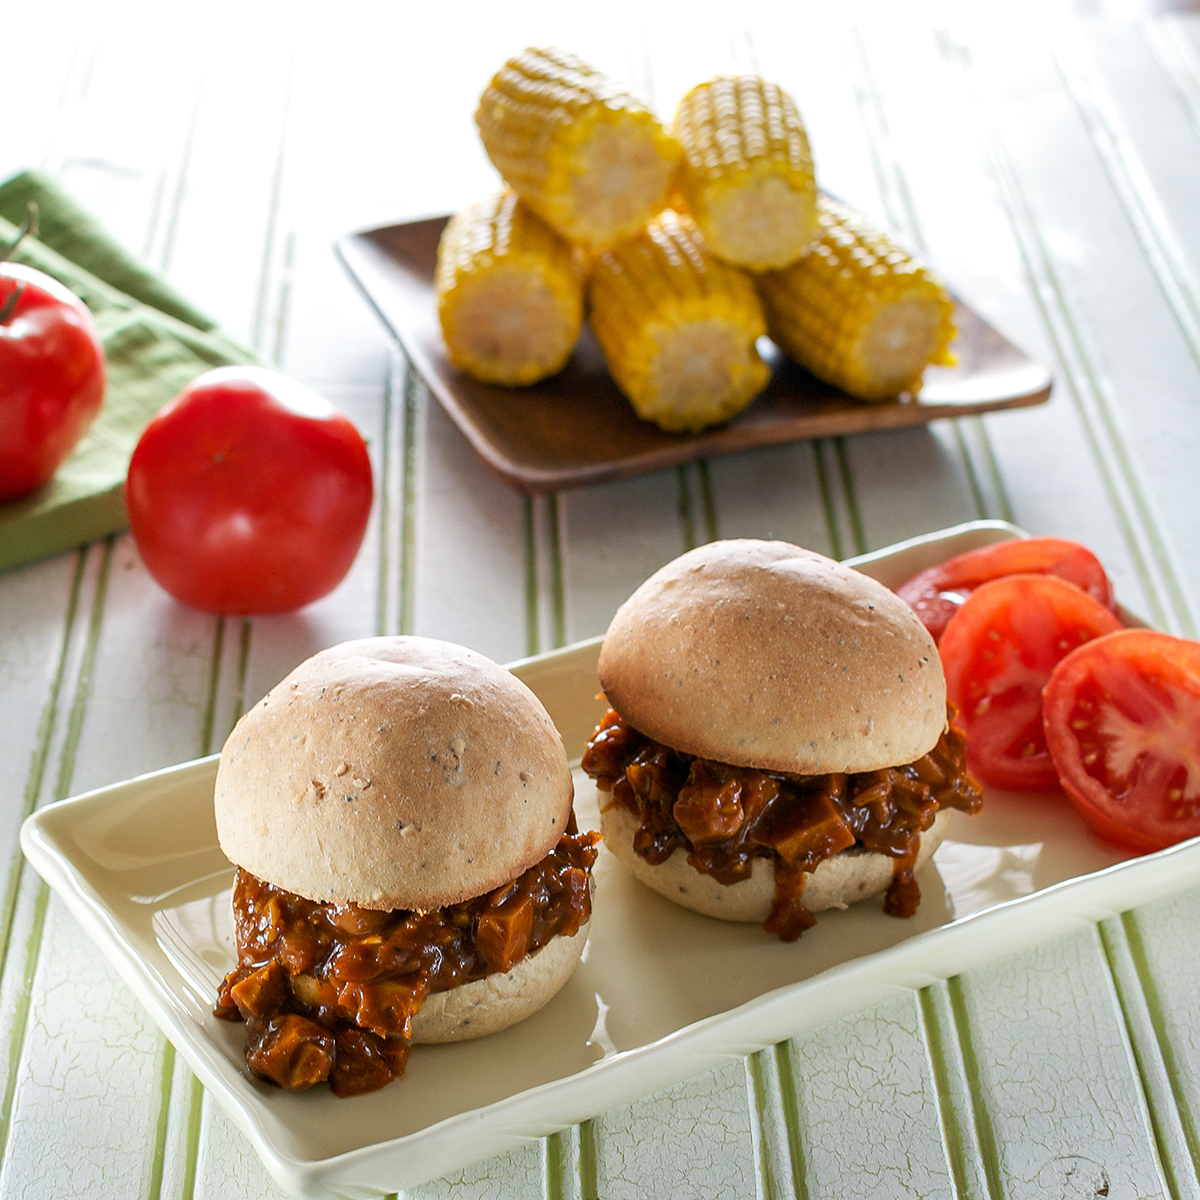 BBQ Jack Sandwiches from Cook the Pantry by Robin Robertson